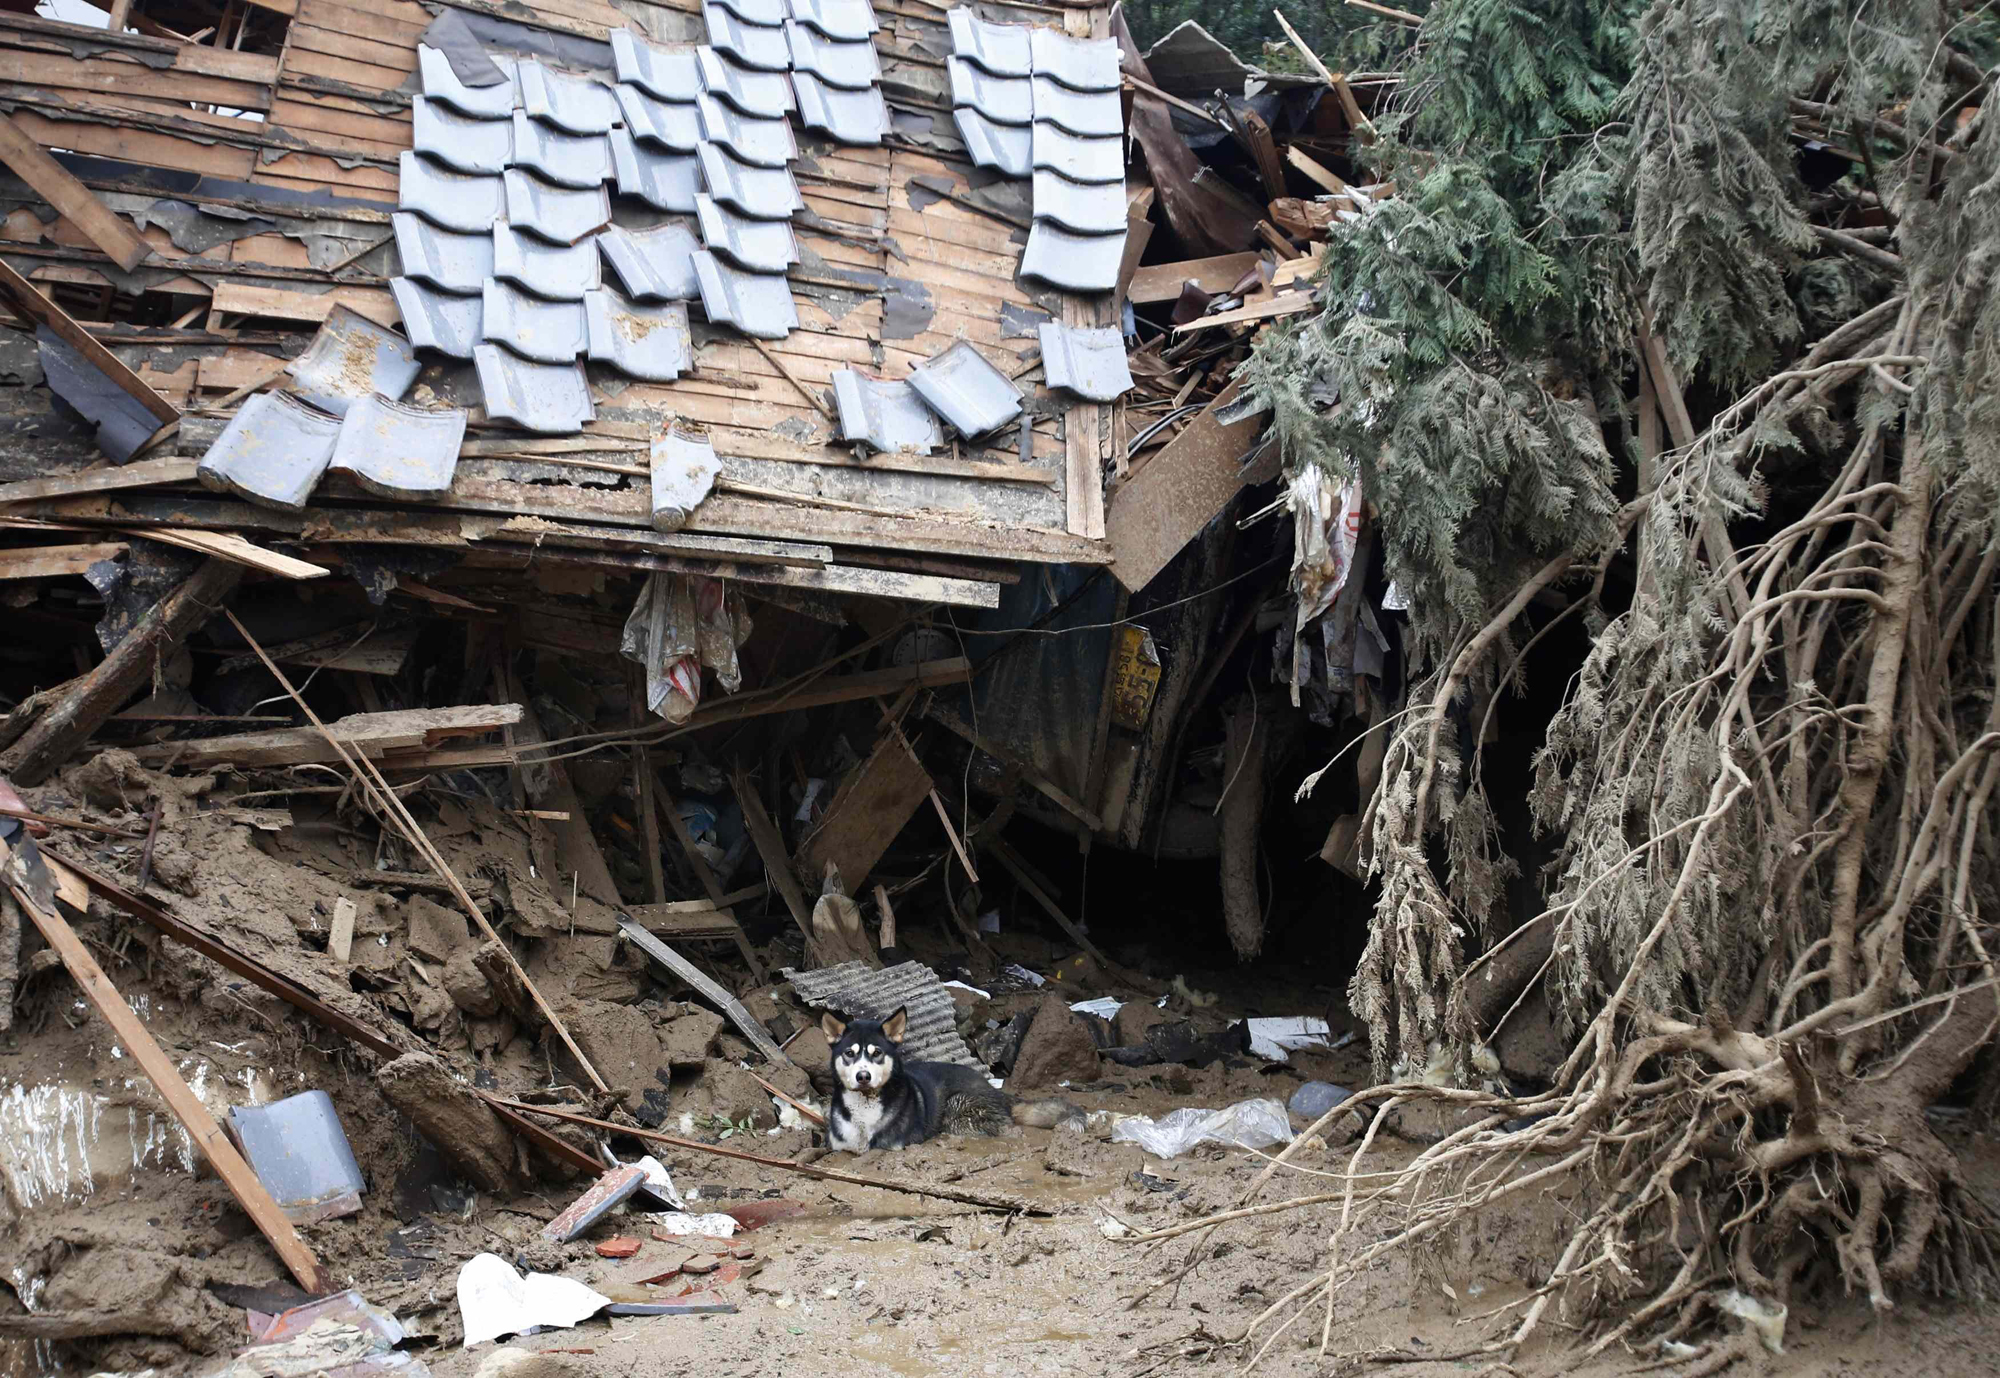 A dog takes a rest under a destroyed house at a site where a landslide swept through a residential area at Asaminami ward in Hiroshima, western Japan, Aug. 20, 2014.